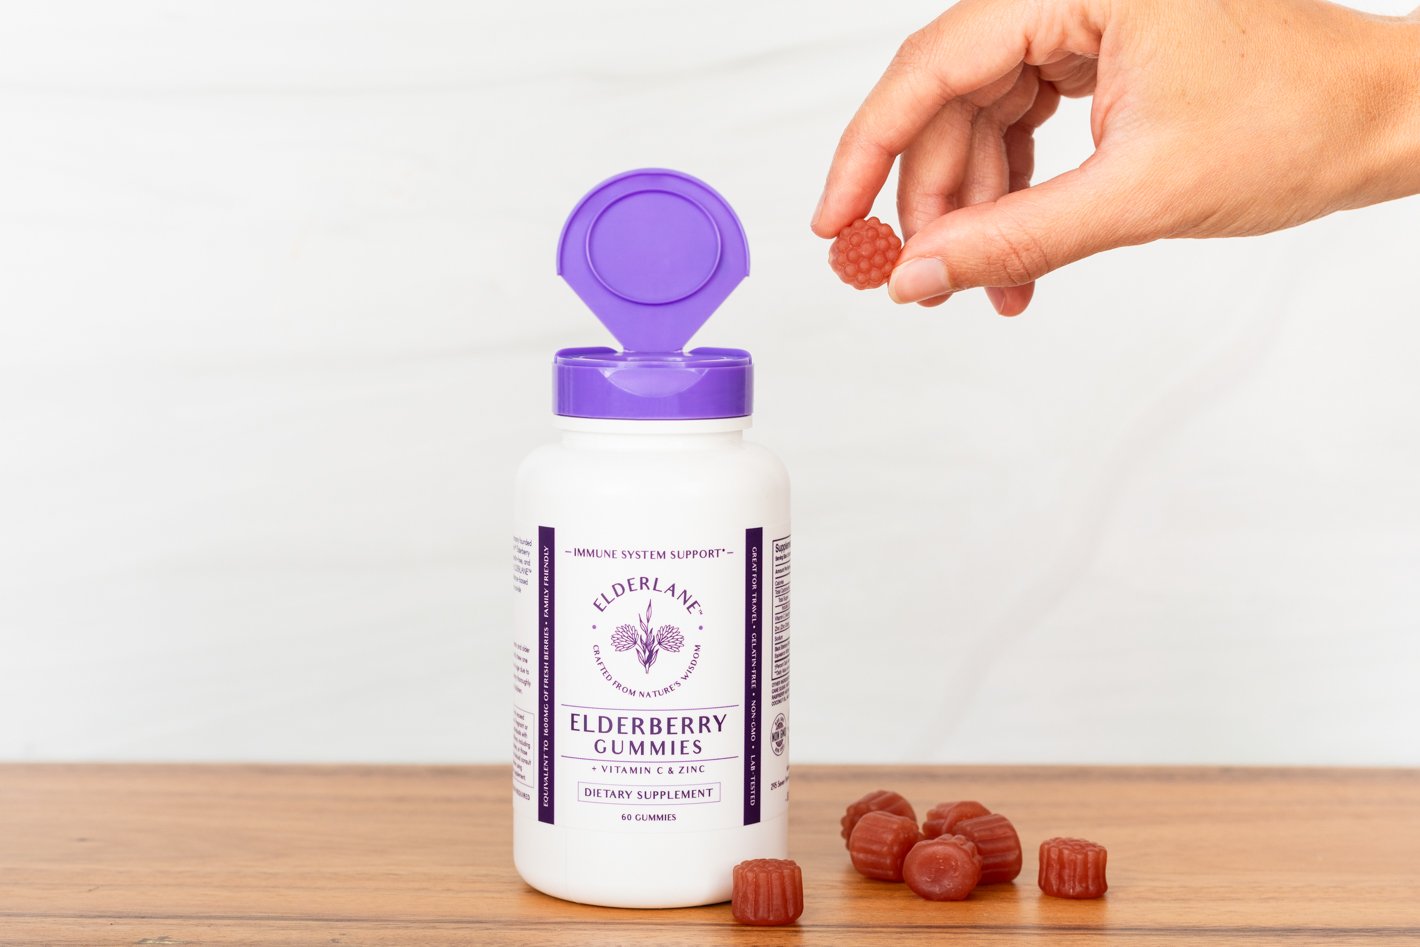 Product photography ideas for elderberry products.